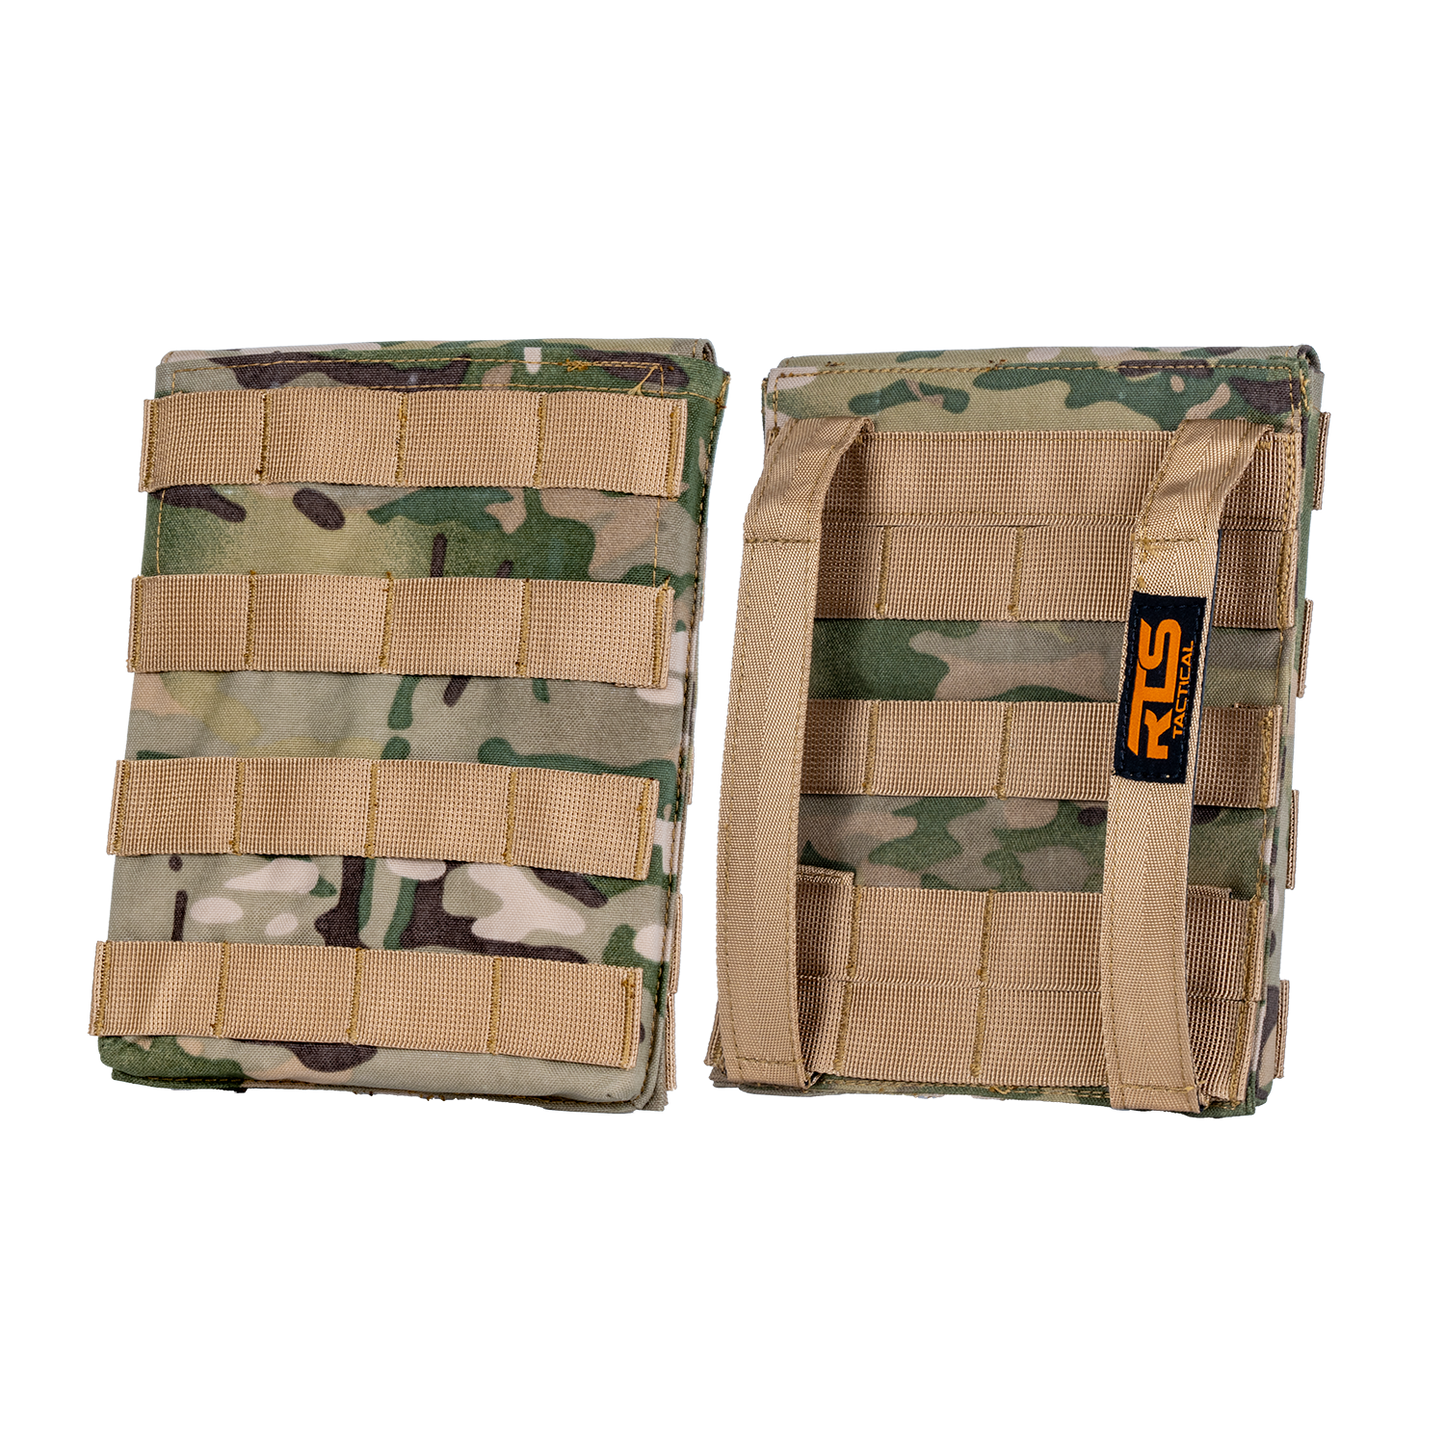 RTS Tactical Premium Side Plate Pouches